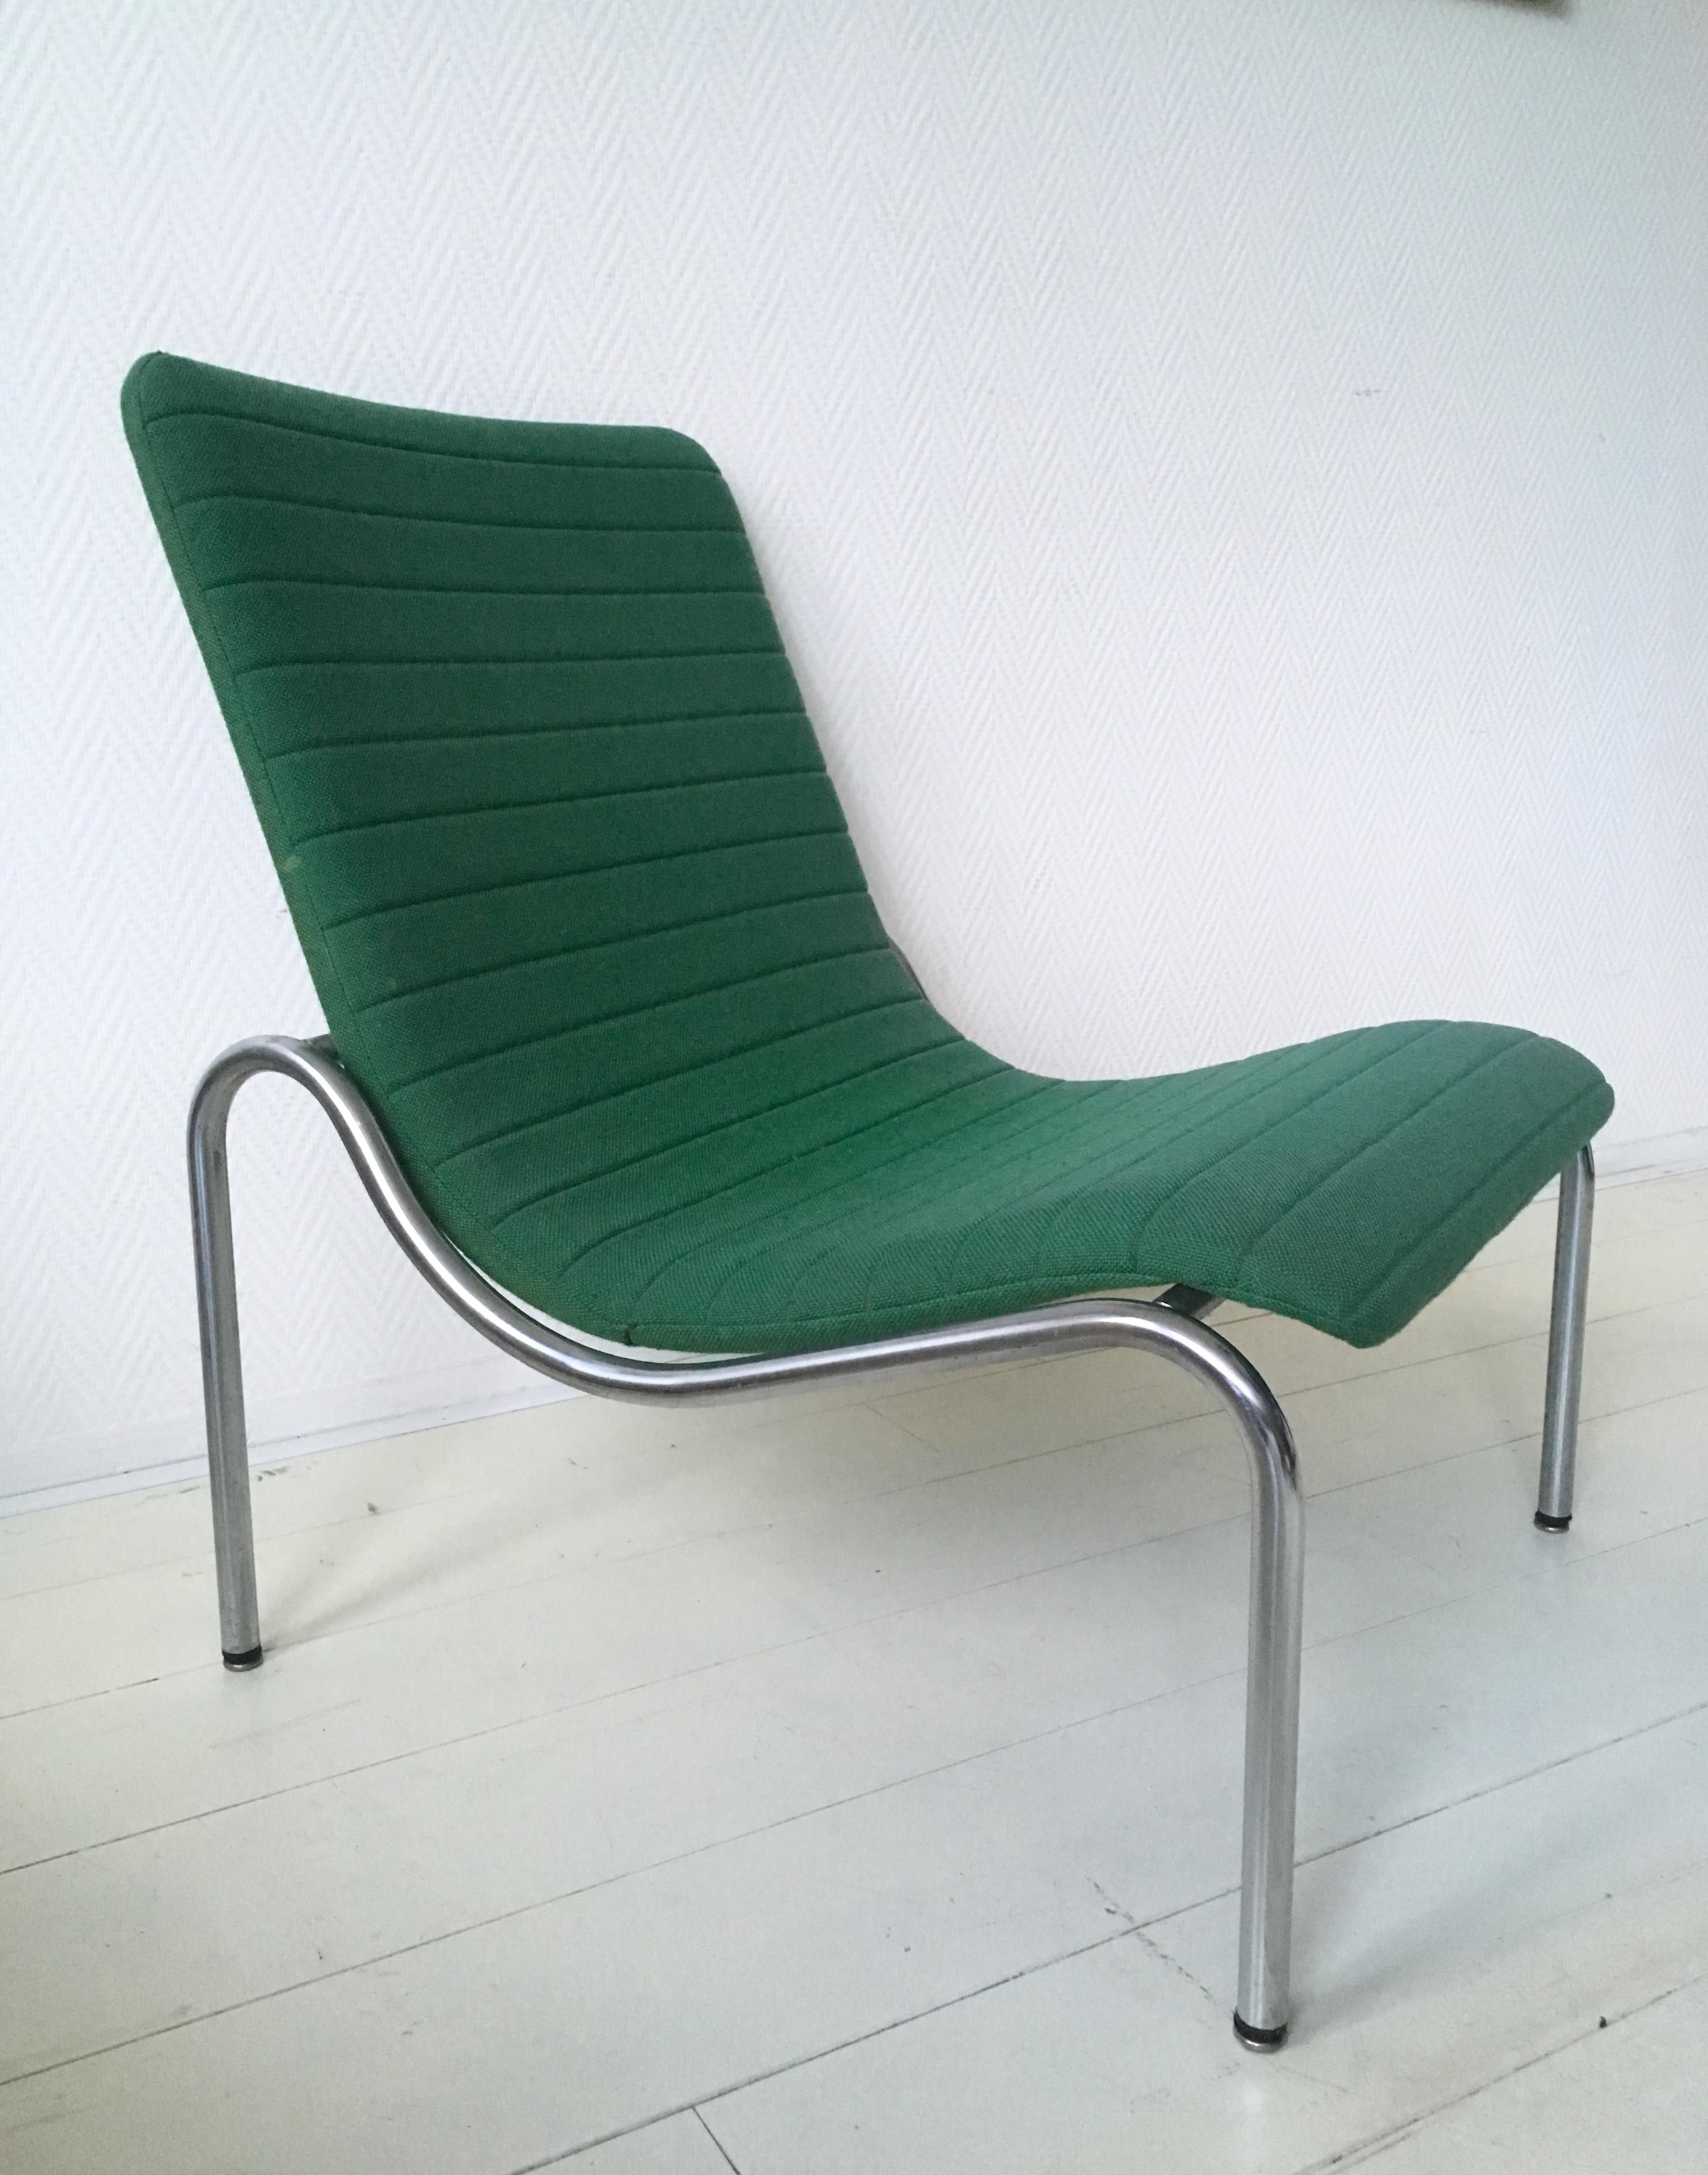 Dutch Green Tubular Lounge Chair by Kho Liang Ie for Stabin Holland, Model 703, 1968 For Sale